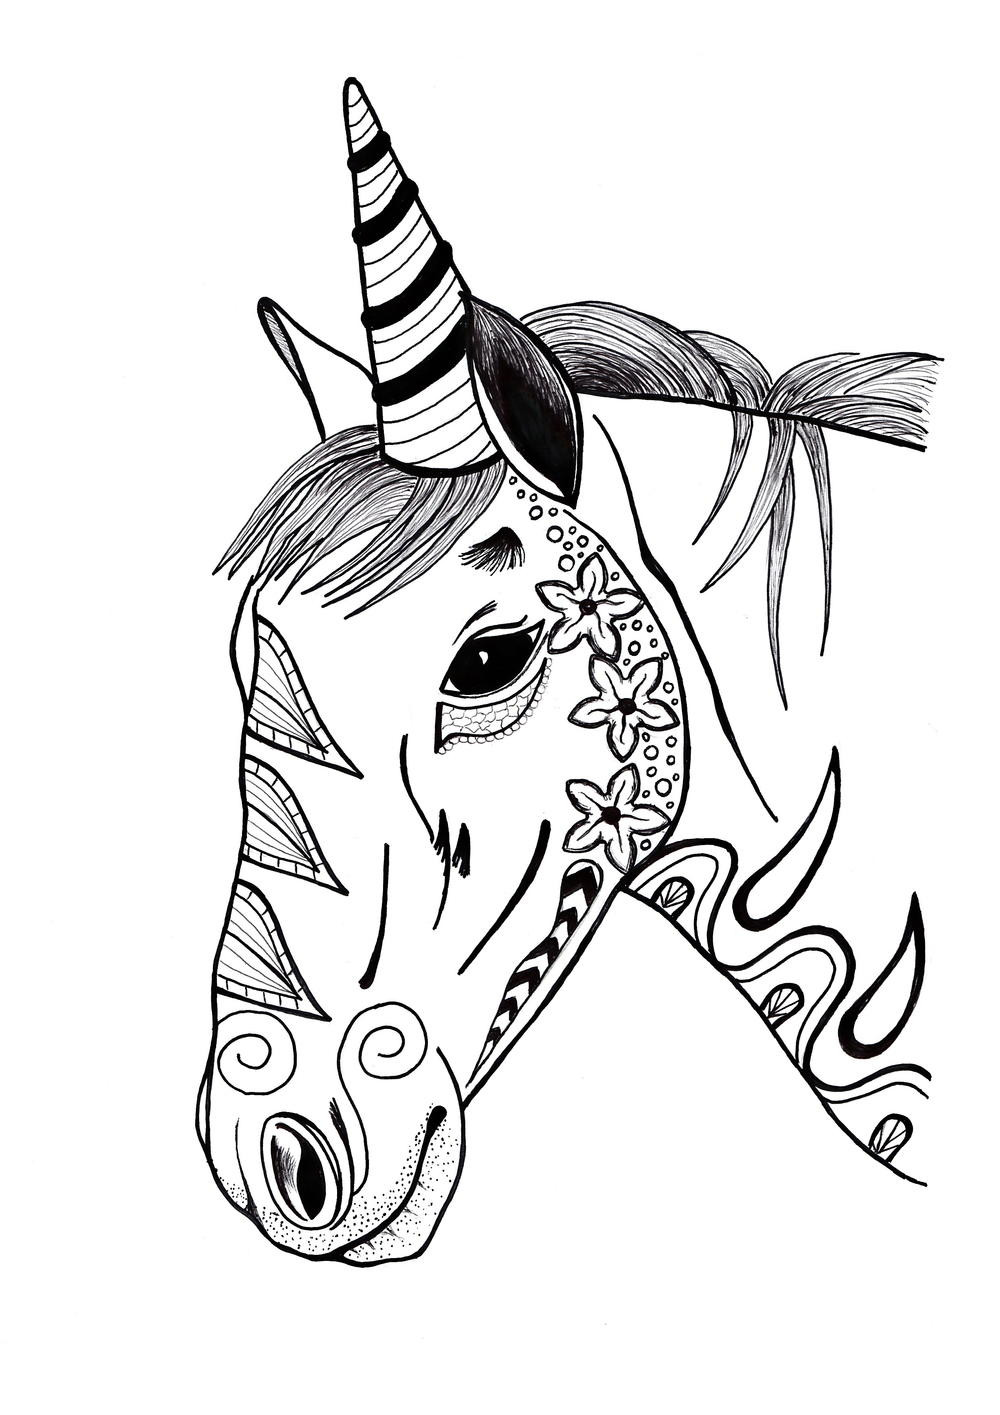 Unicorn Adult Coloring Book
 Unicorn Coloring Page PDF Download